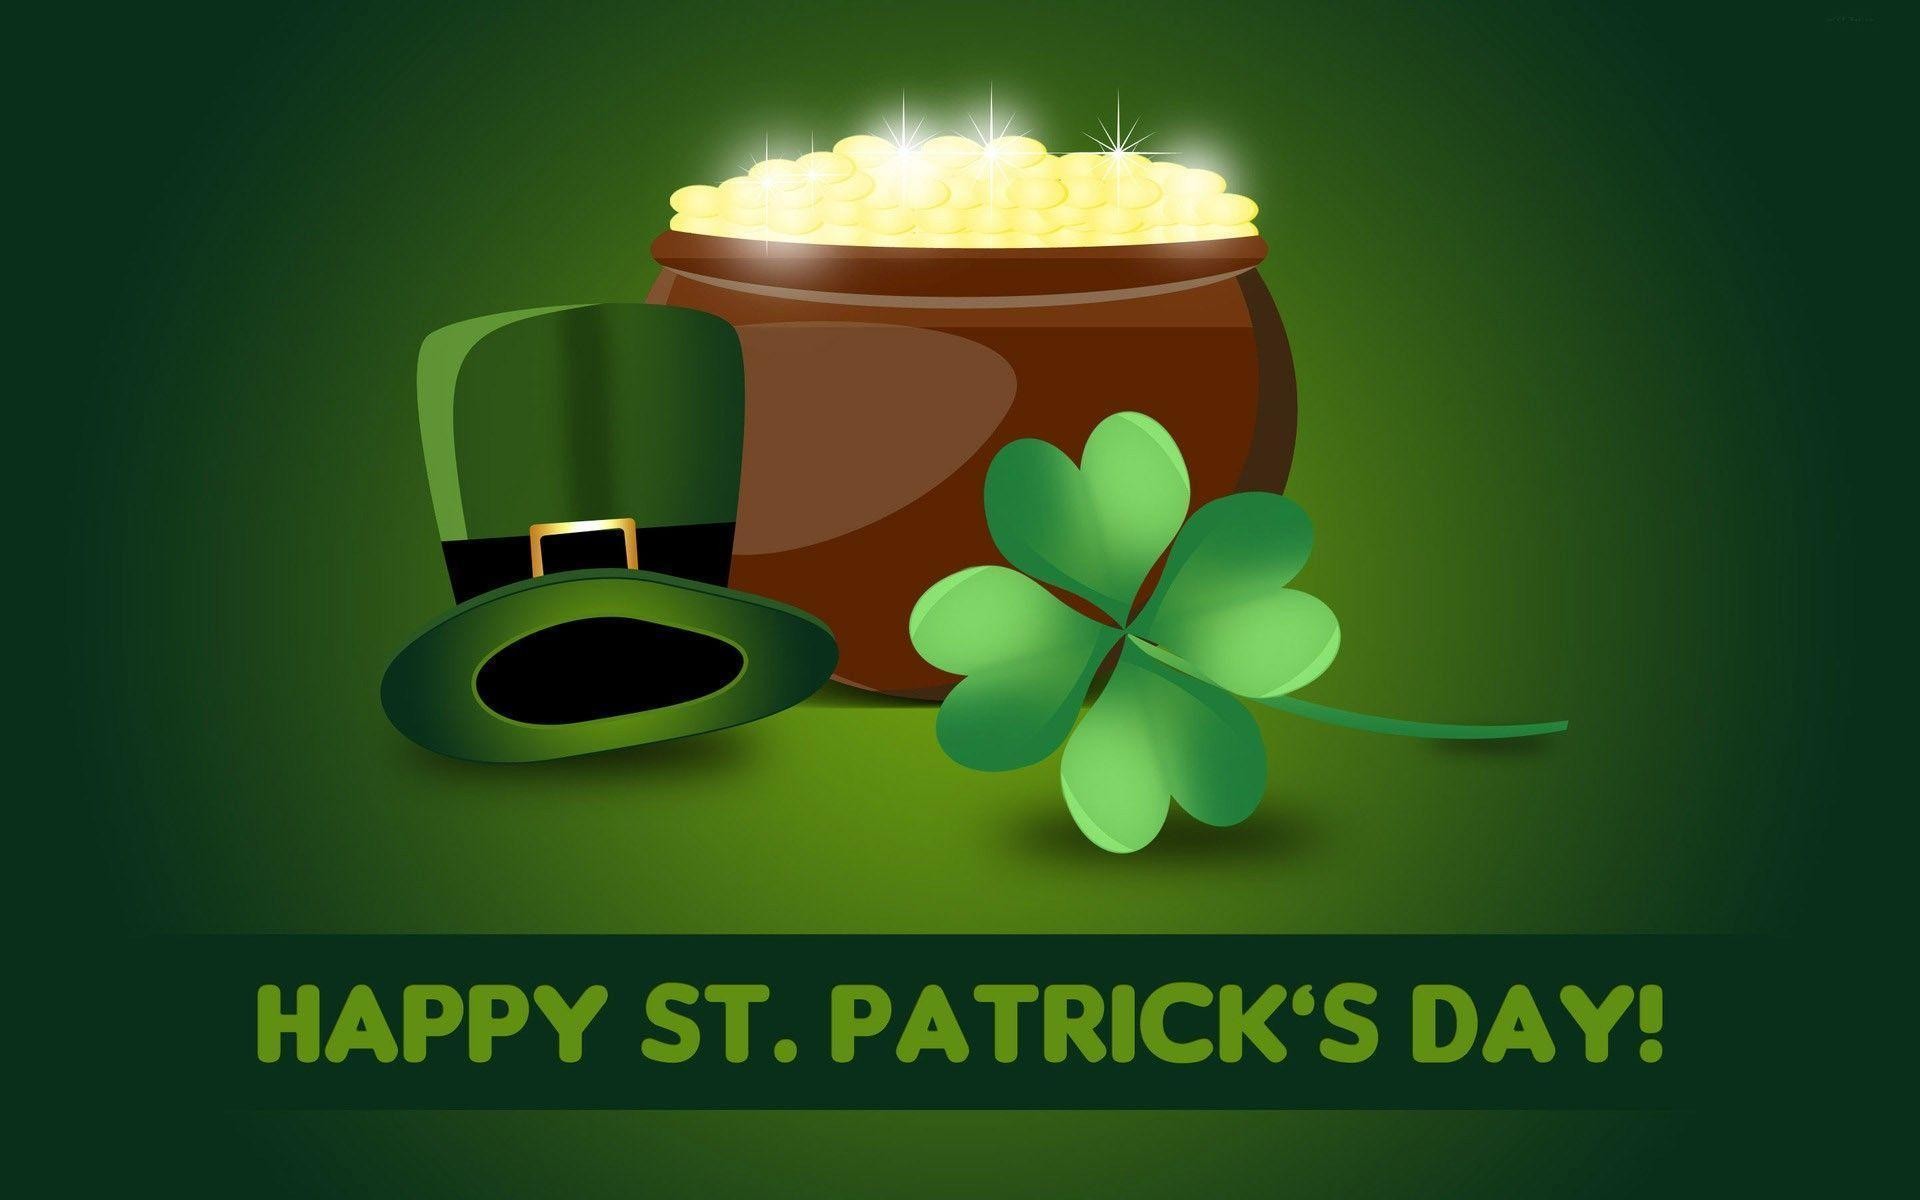 Happy st patricks day holiday greetings wallpaper Fine Wallpaperss